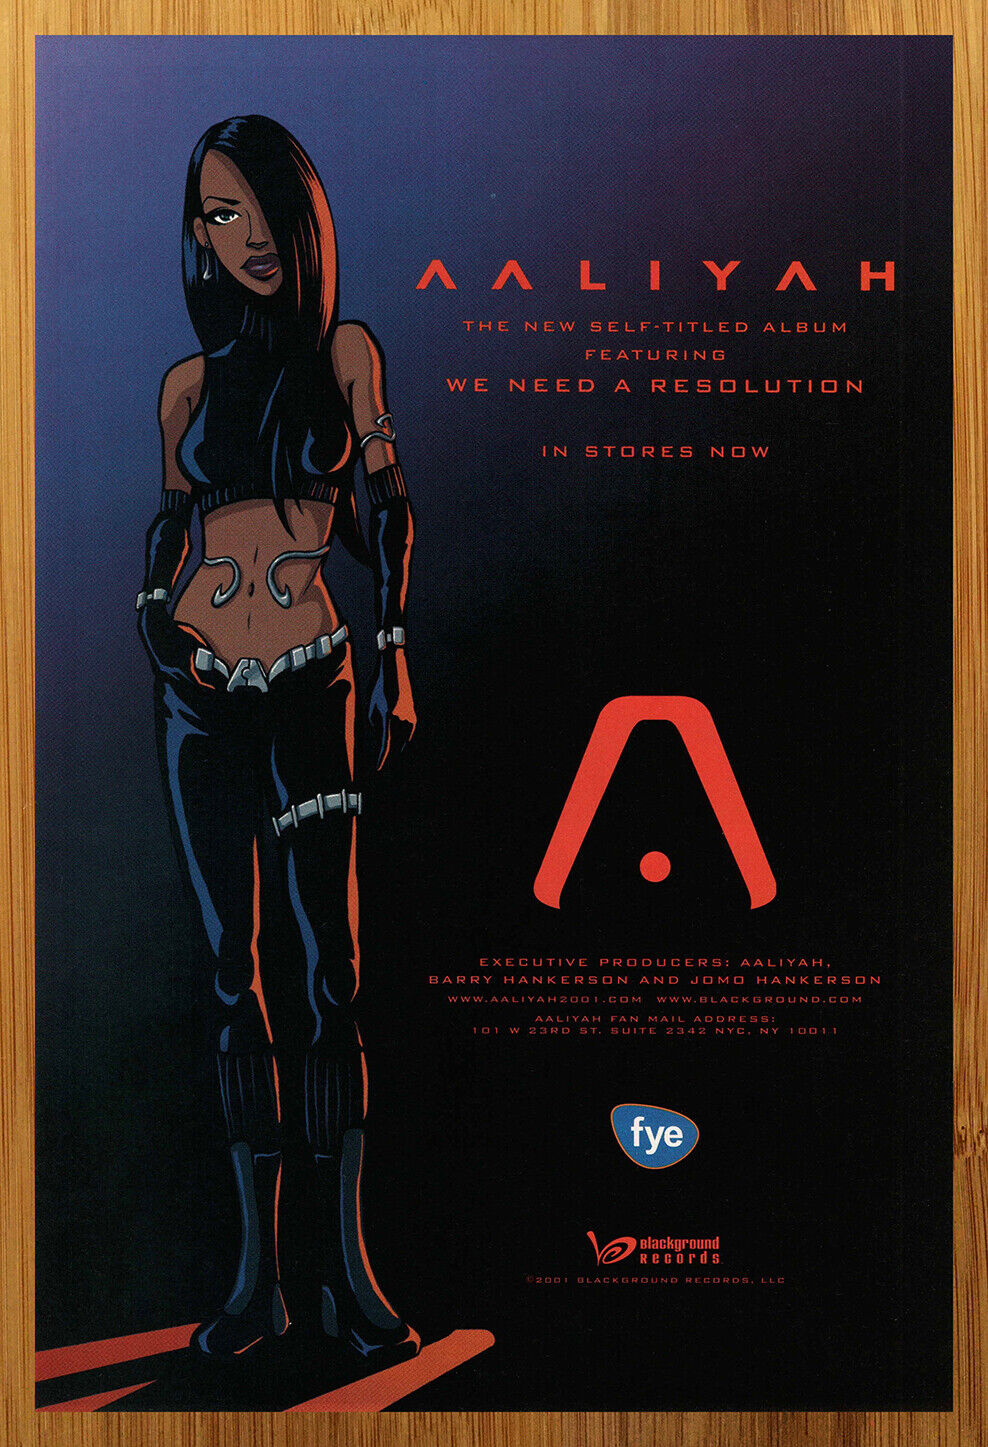 2001 Aaliyah Self-Titled Album/CD Promo Print Ad/Poster Art We Need A Resolution